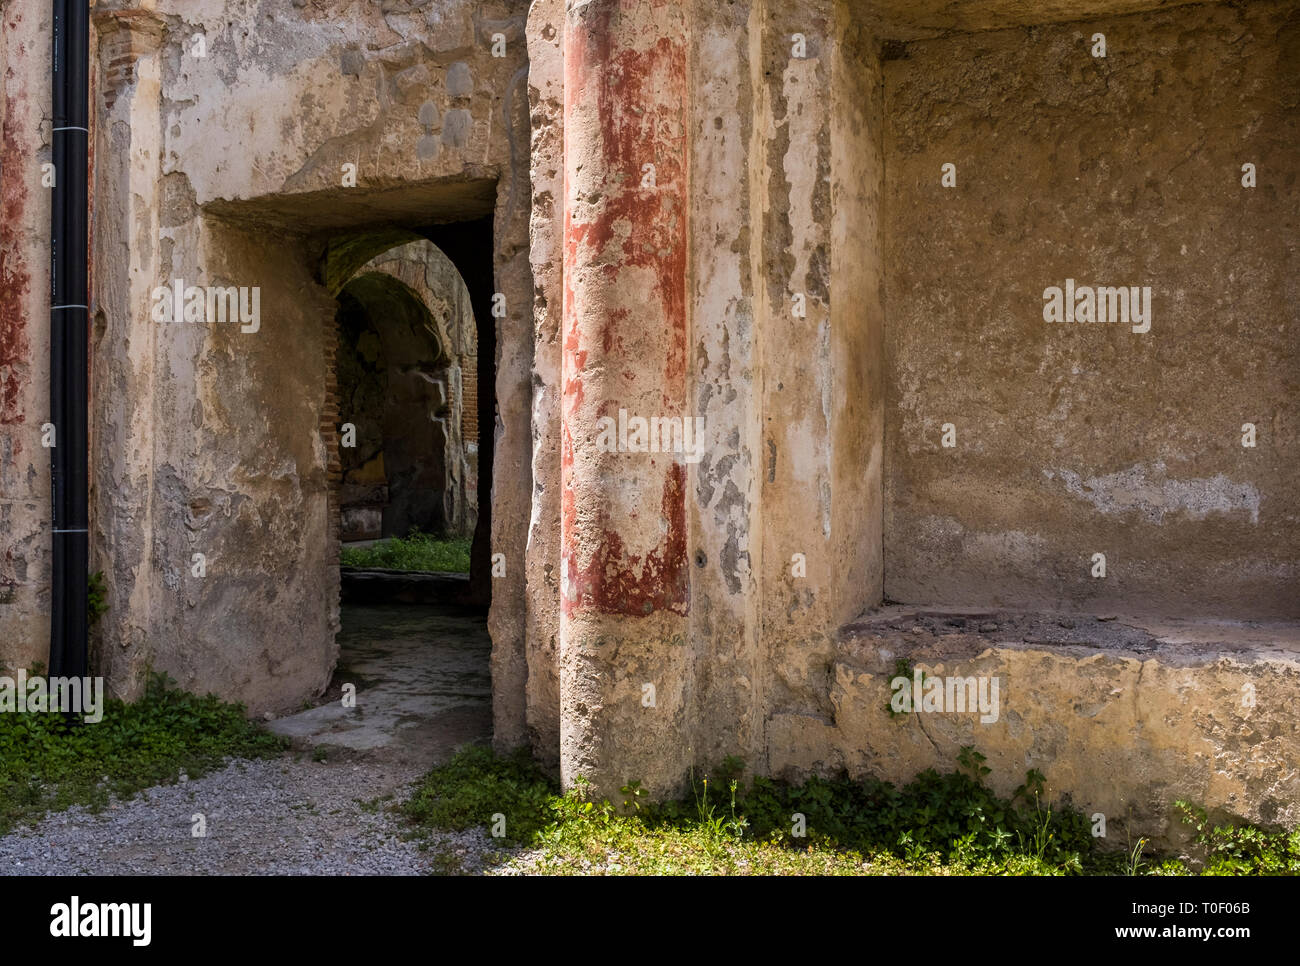 Red paint still visible in the ruins of Villa Romana, an ancient Roman archaeological site hidden in the village of Minori, Italy on the Amalfi Coast Stock Photo